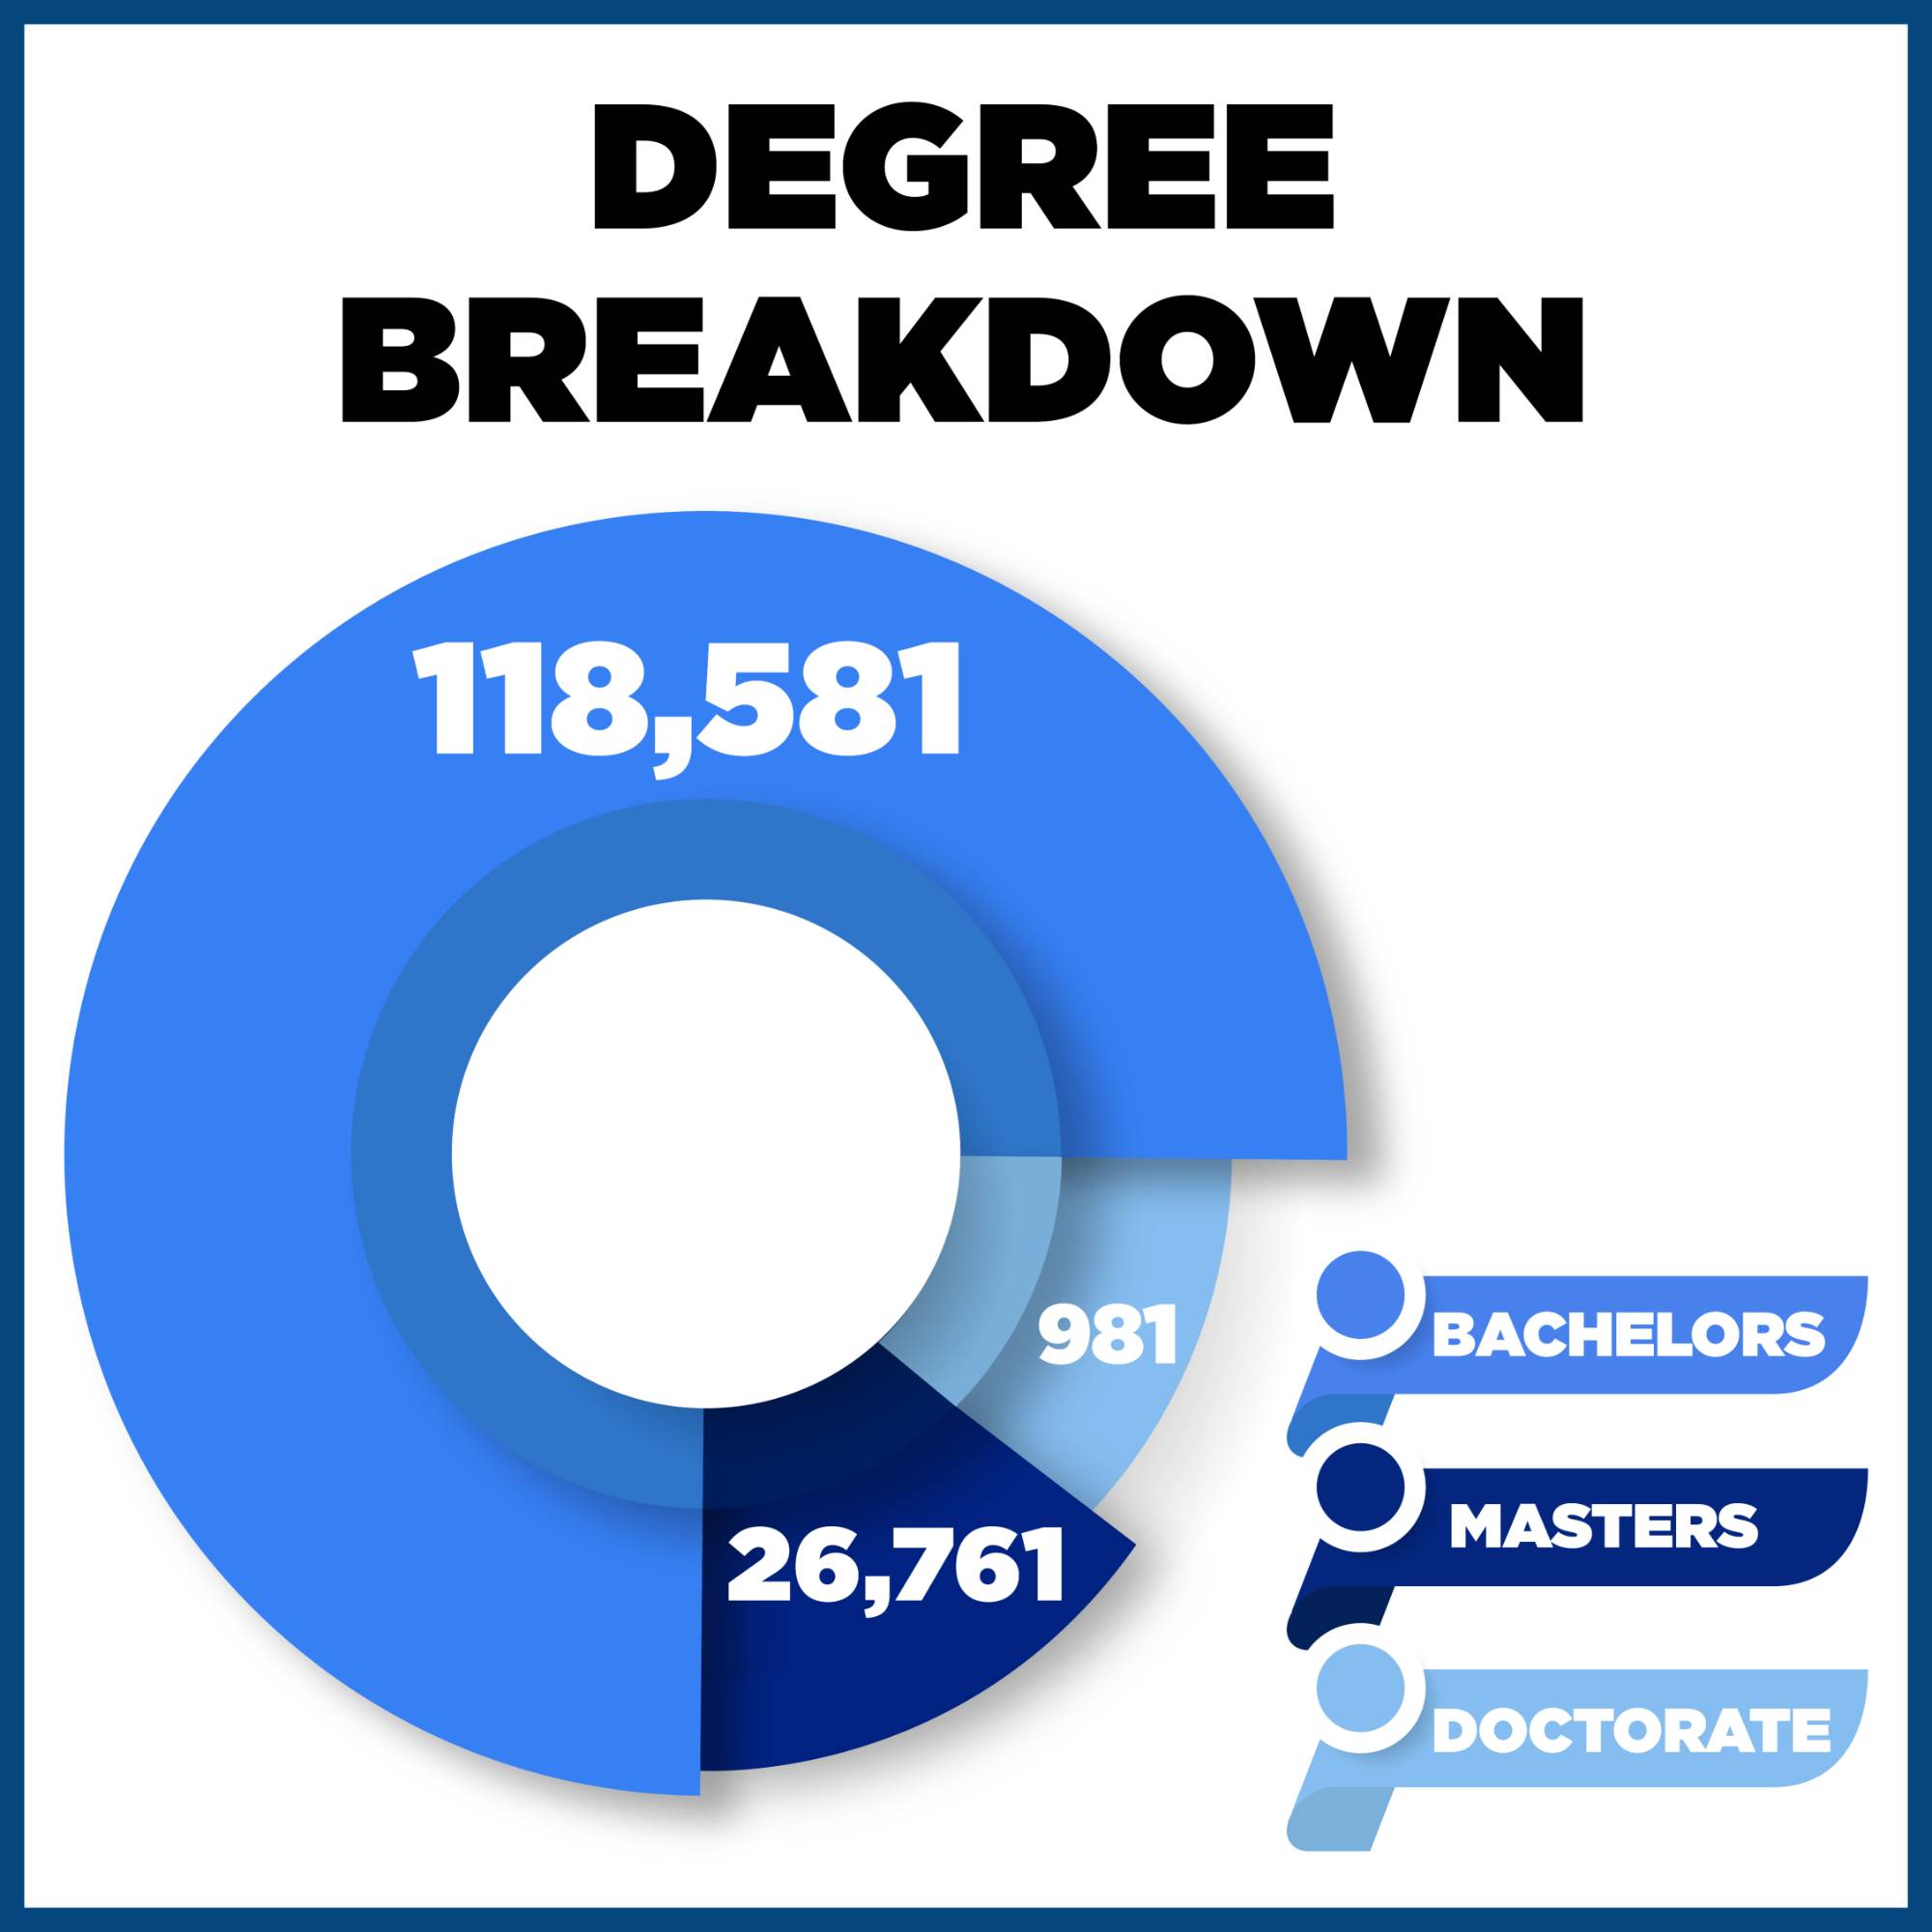 A pie chart breaks down the types of degrees awarded which include: 118,581 Bachelors degrees awarded, 26,761 Masters degrees awarded, and 981 Doctorate degrees awarded.